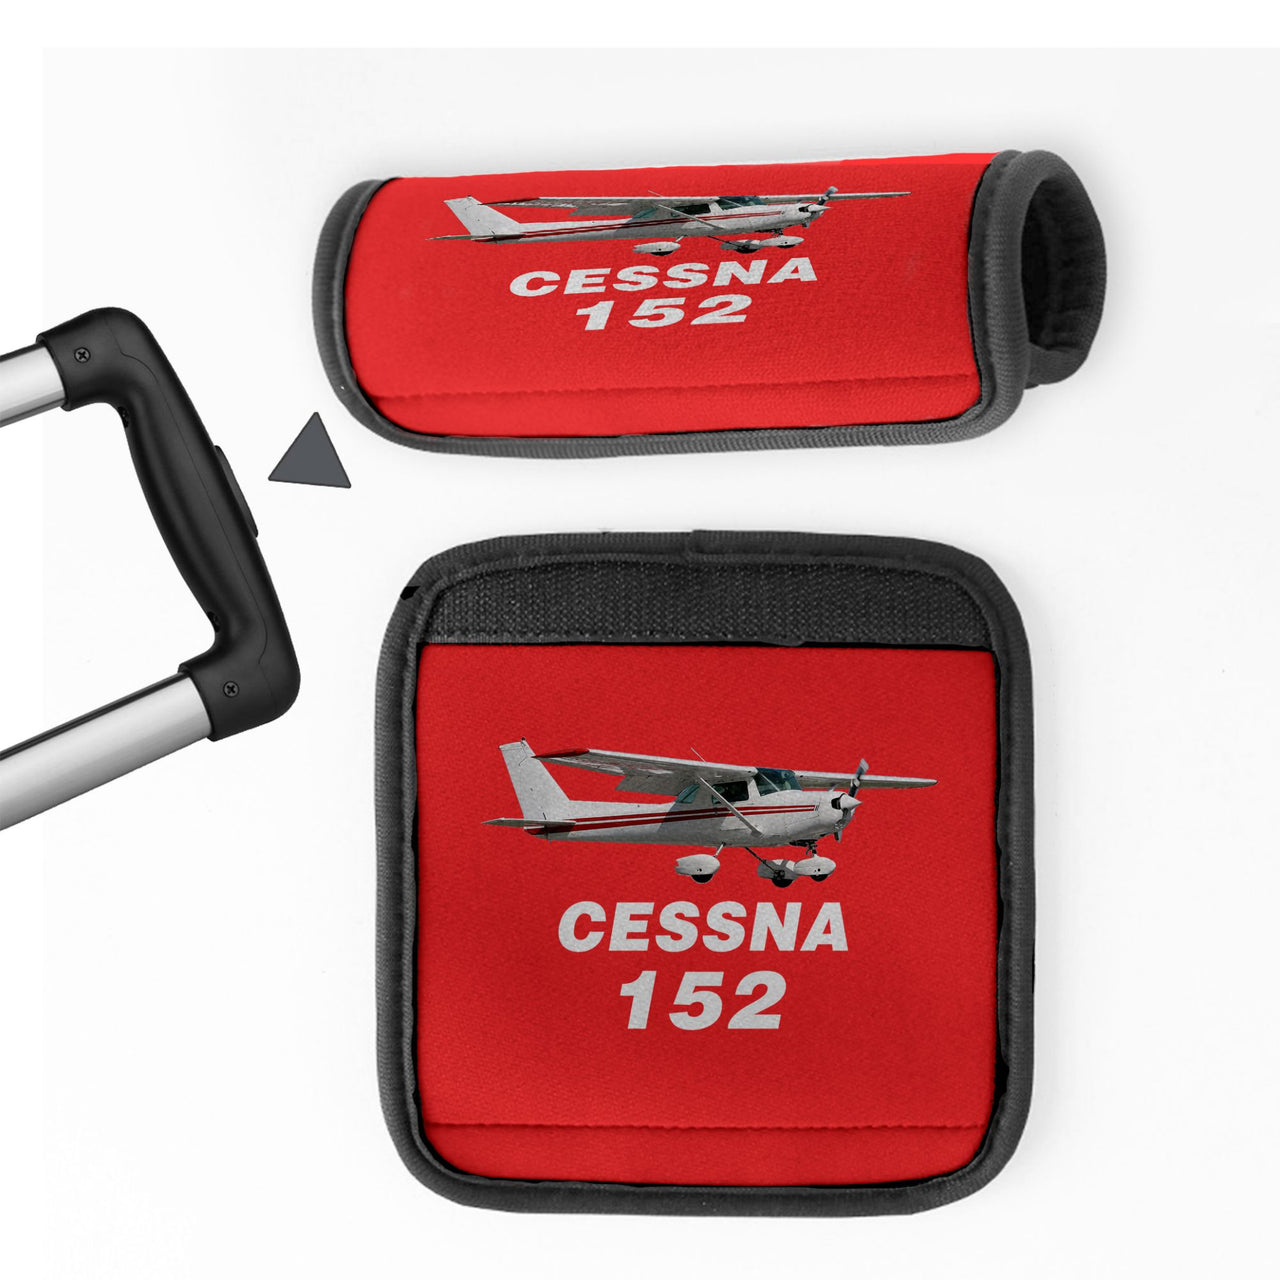 The Cessna 152 Designed Neoprene Luggage Handle Covers